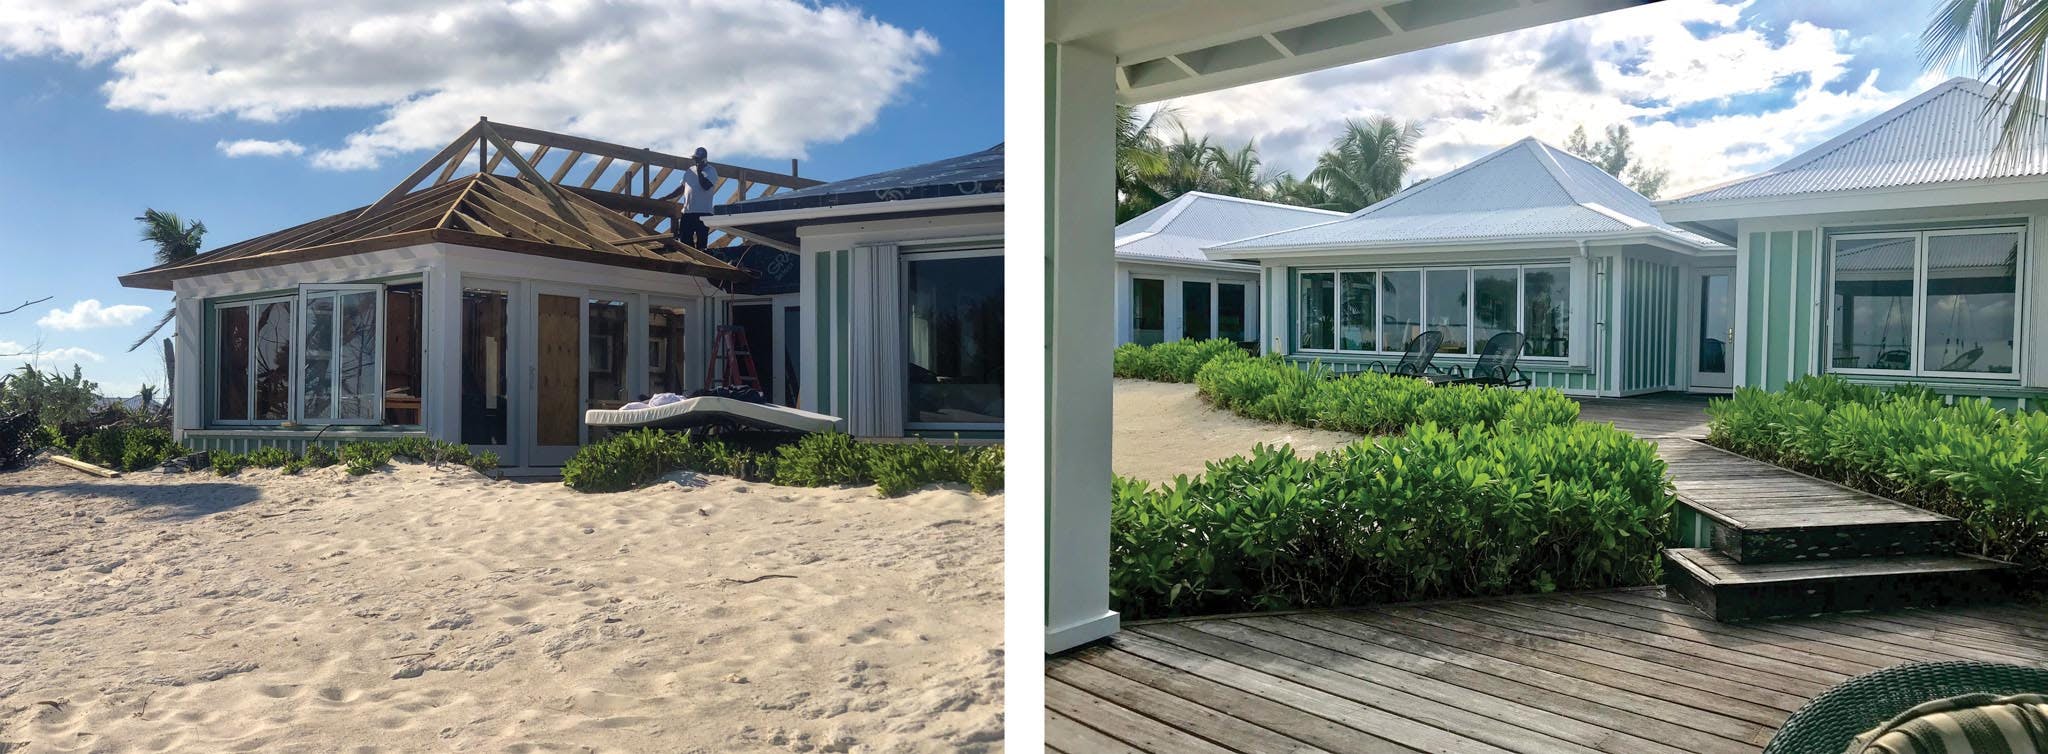 home damaged by hurricane before and after repair 